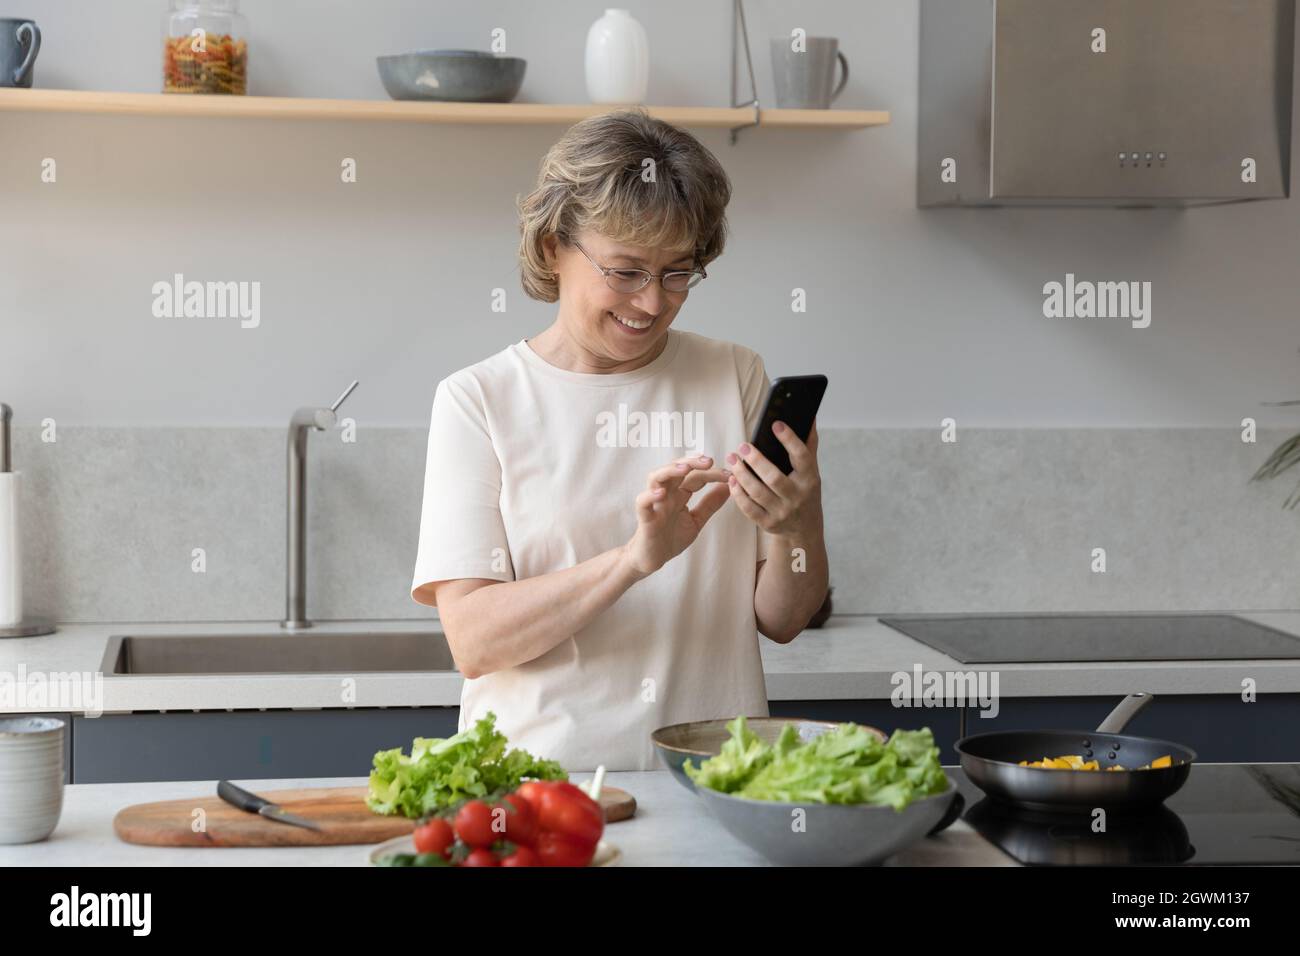 Happy middle aged woman using phone, cooking food. Stock Photo